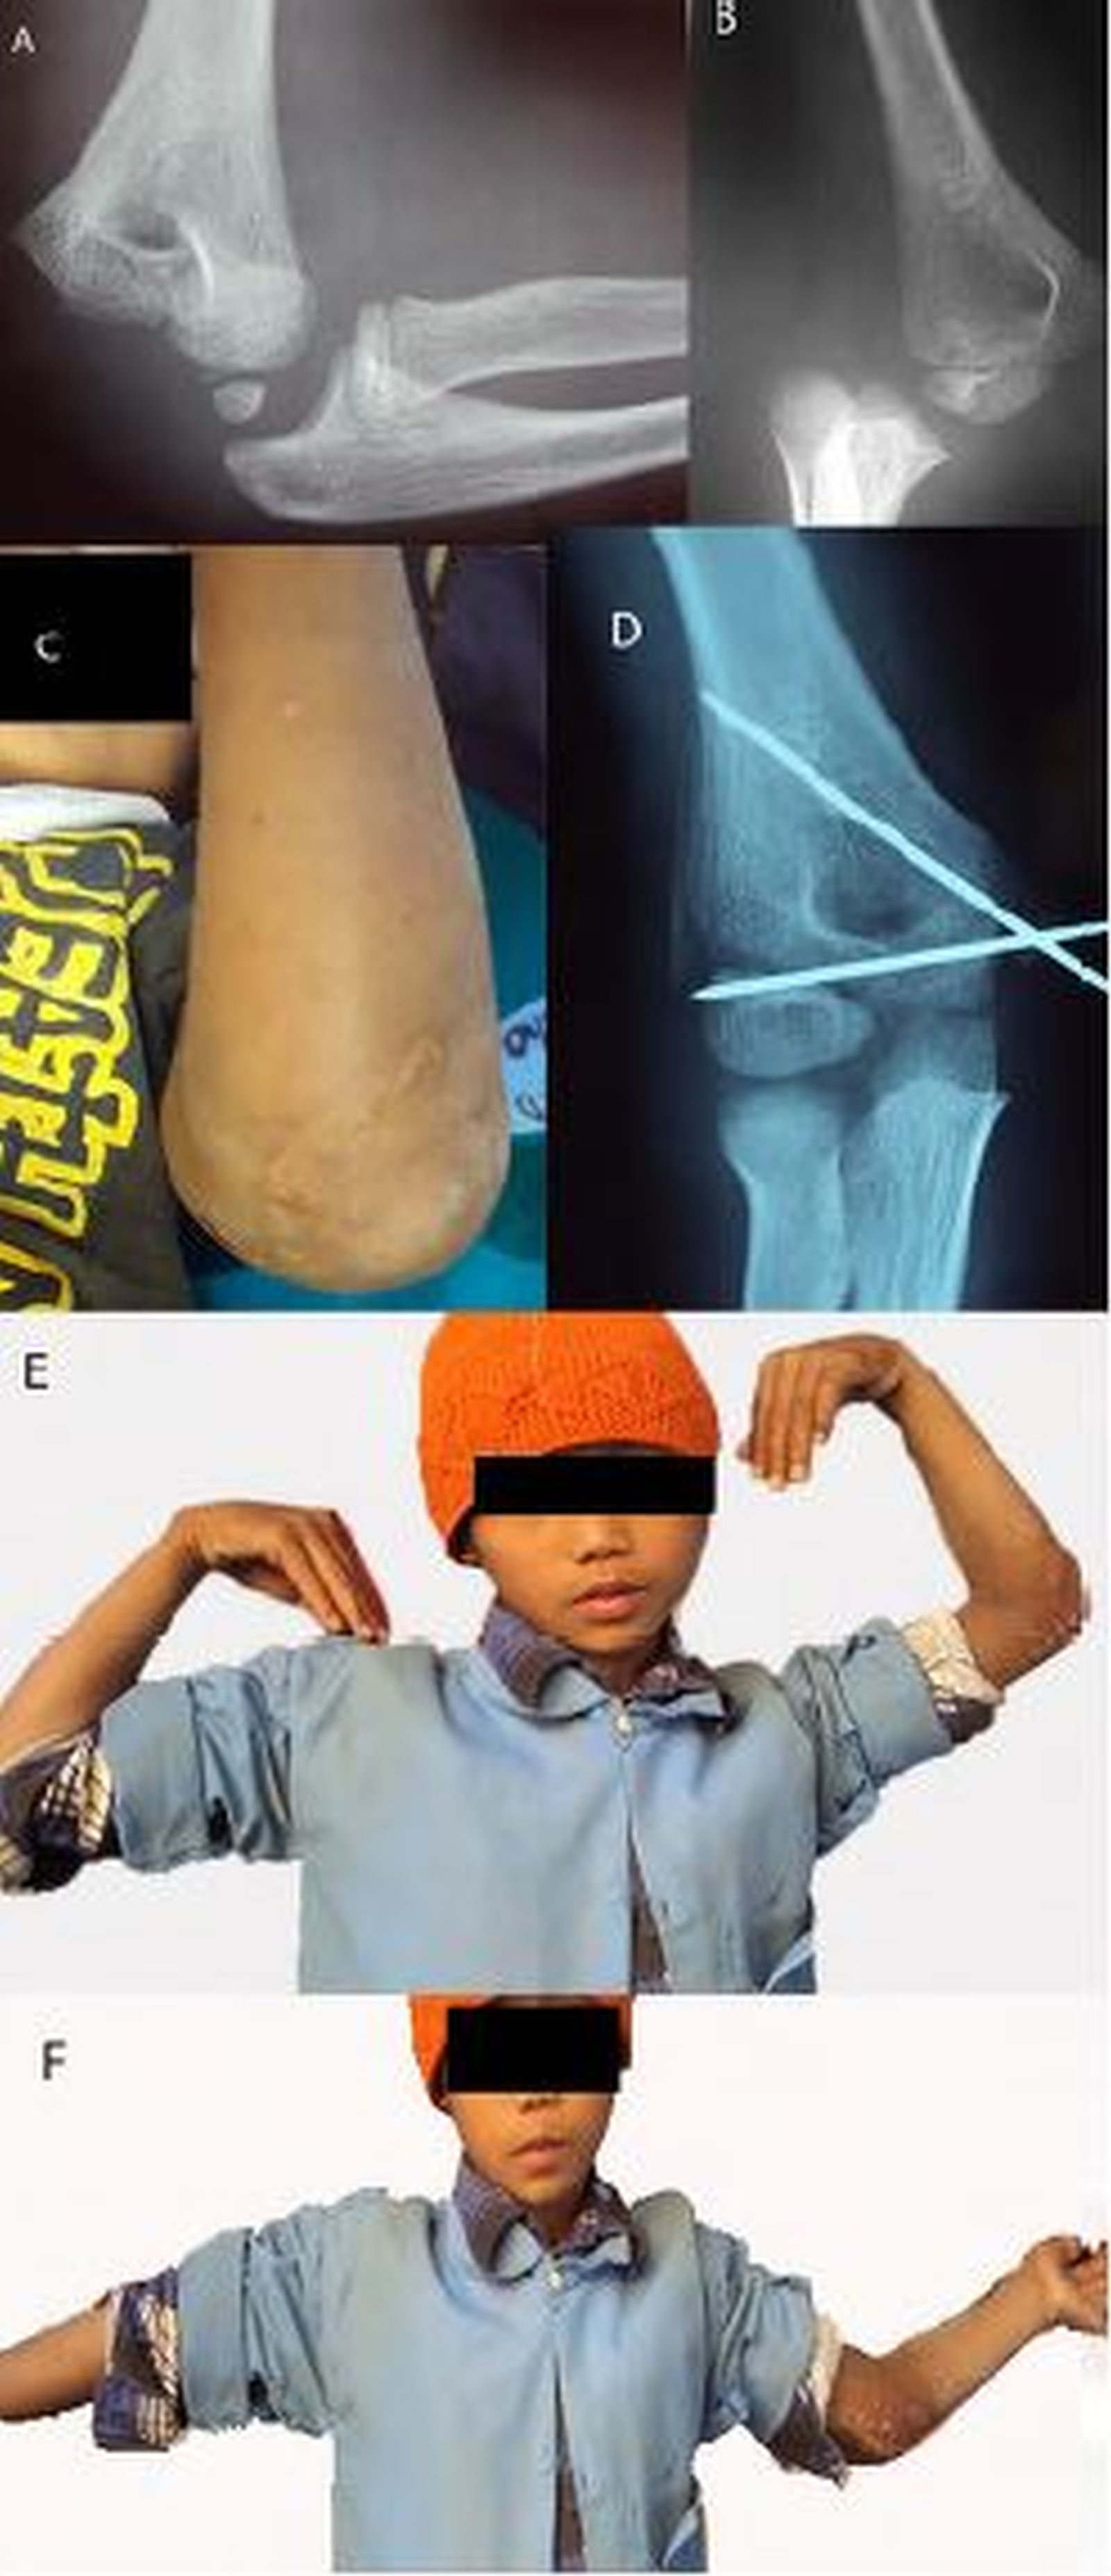 Cureus Radiological And Functional Outcome Of Medial Epicondyle Fracture Treated Surgically In Children And Adolescents A Retrospective Study